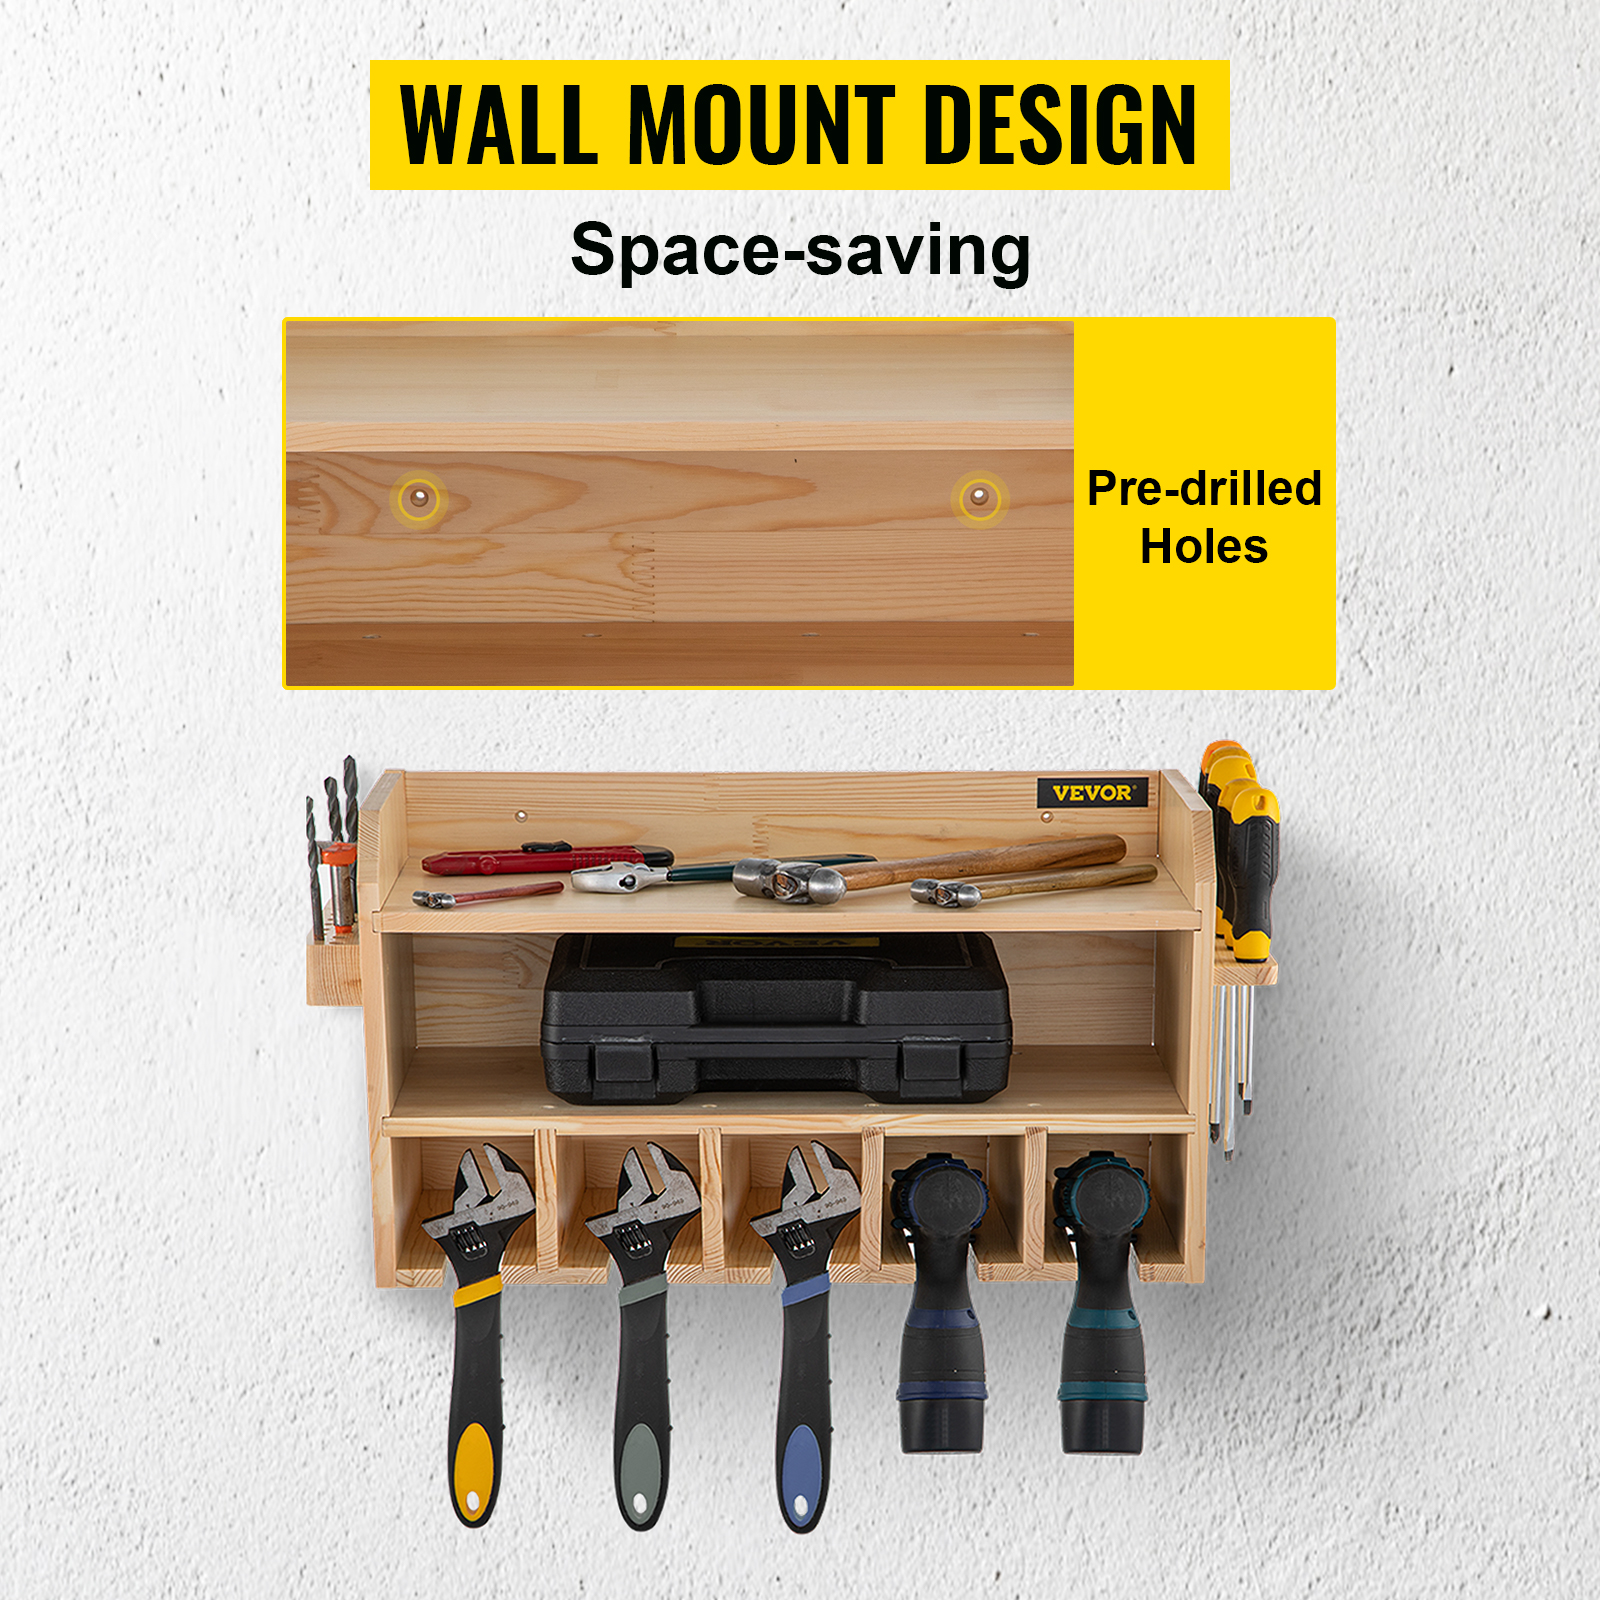 WorkPro Power Tool Organizer, Cordless Drill Holder Storage Wall Mount with 5 Drill Hanging Slots, Screwdriver Rack, Solid Wooden Tool Storage for